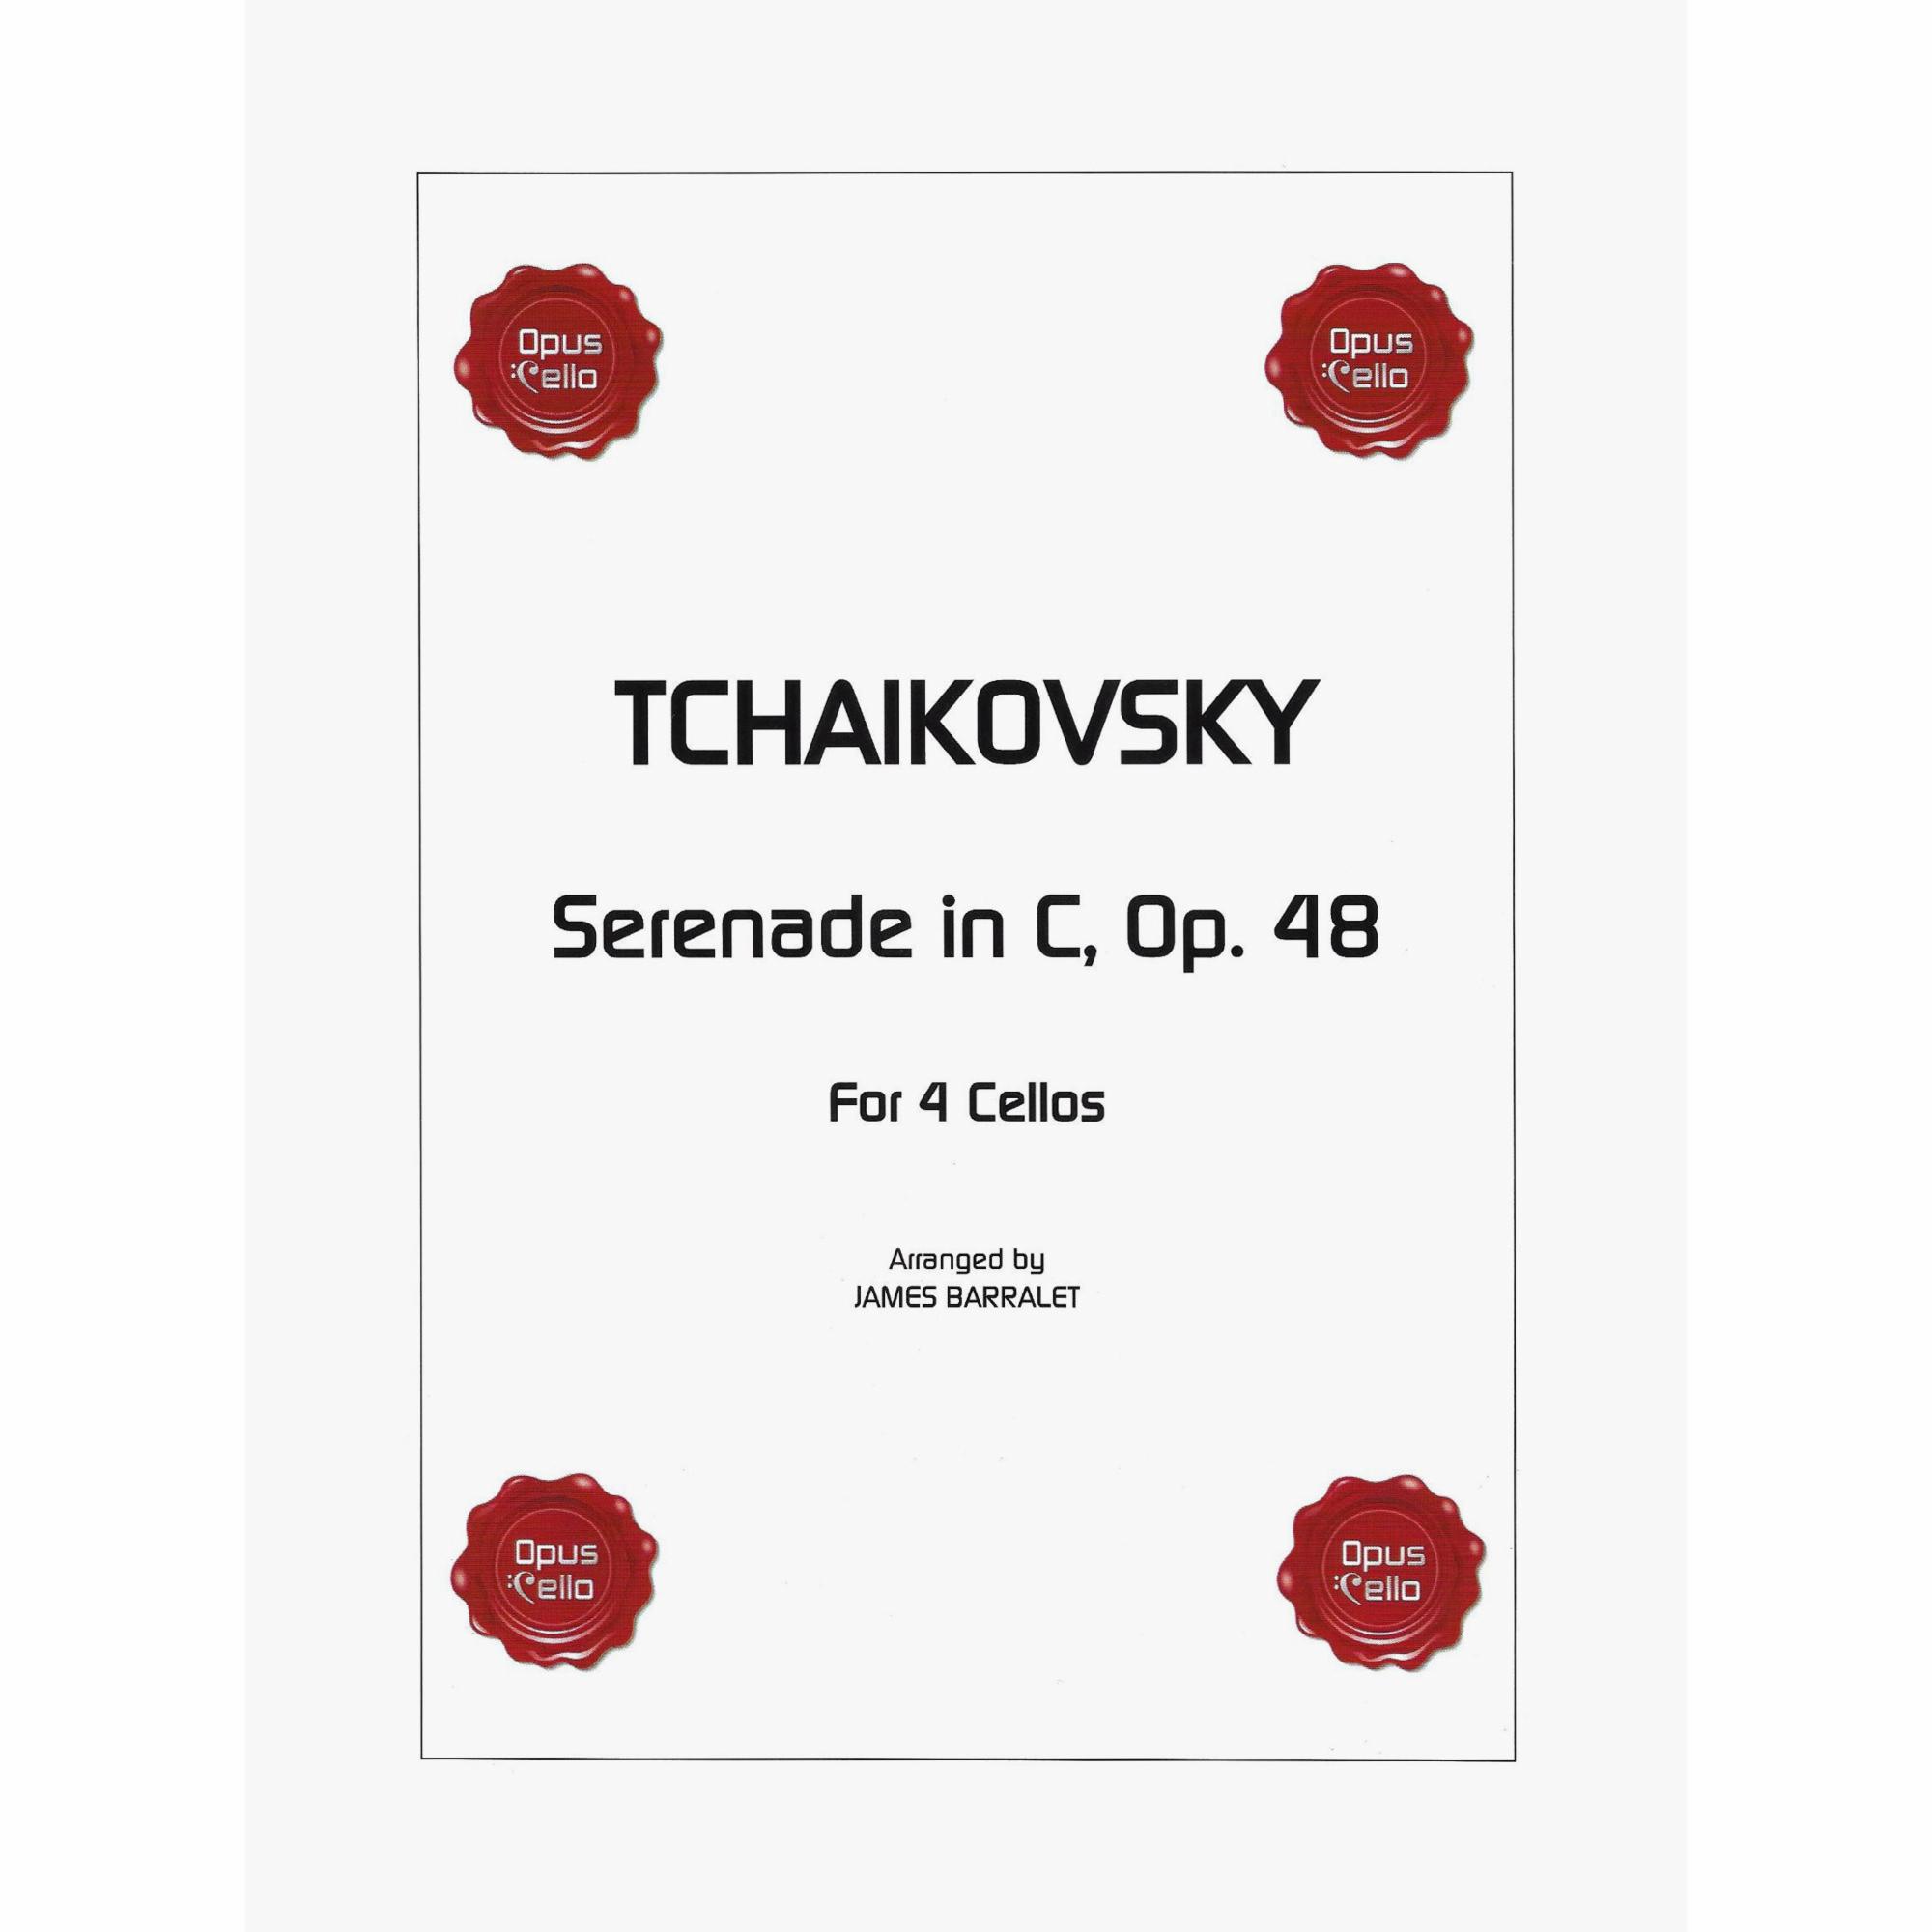 Tchaikovsky -- Serenade in C, Op. 48 for Four Cellos